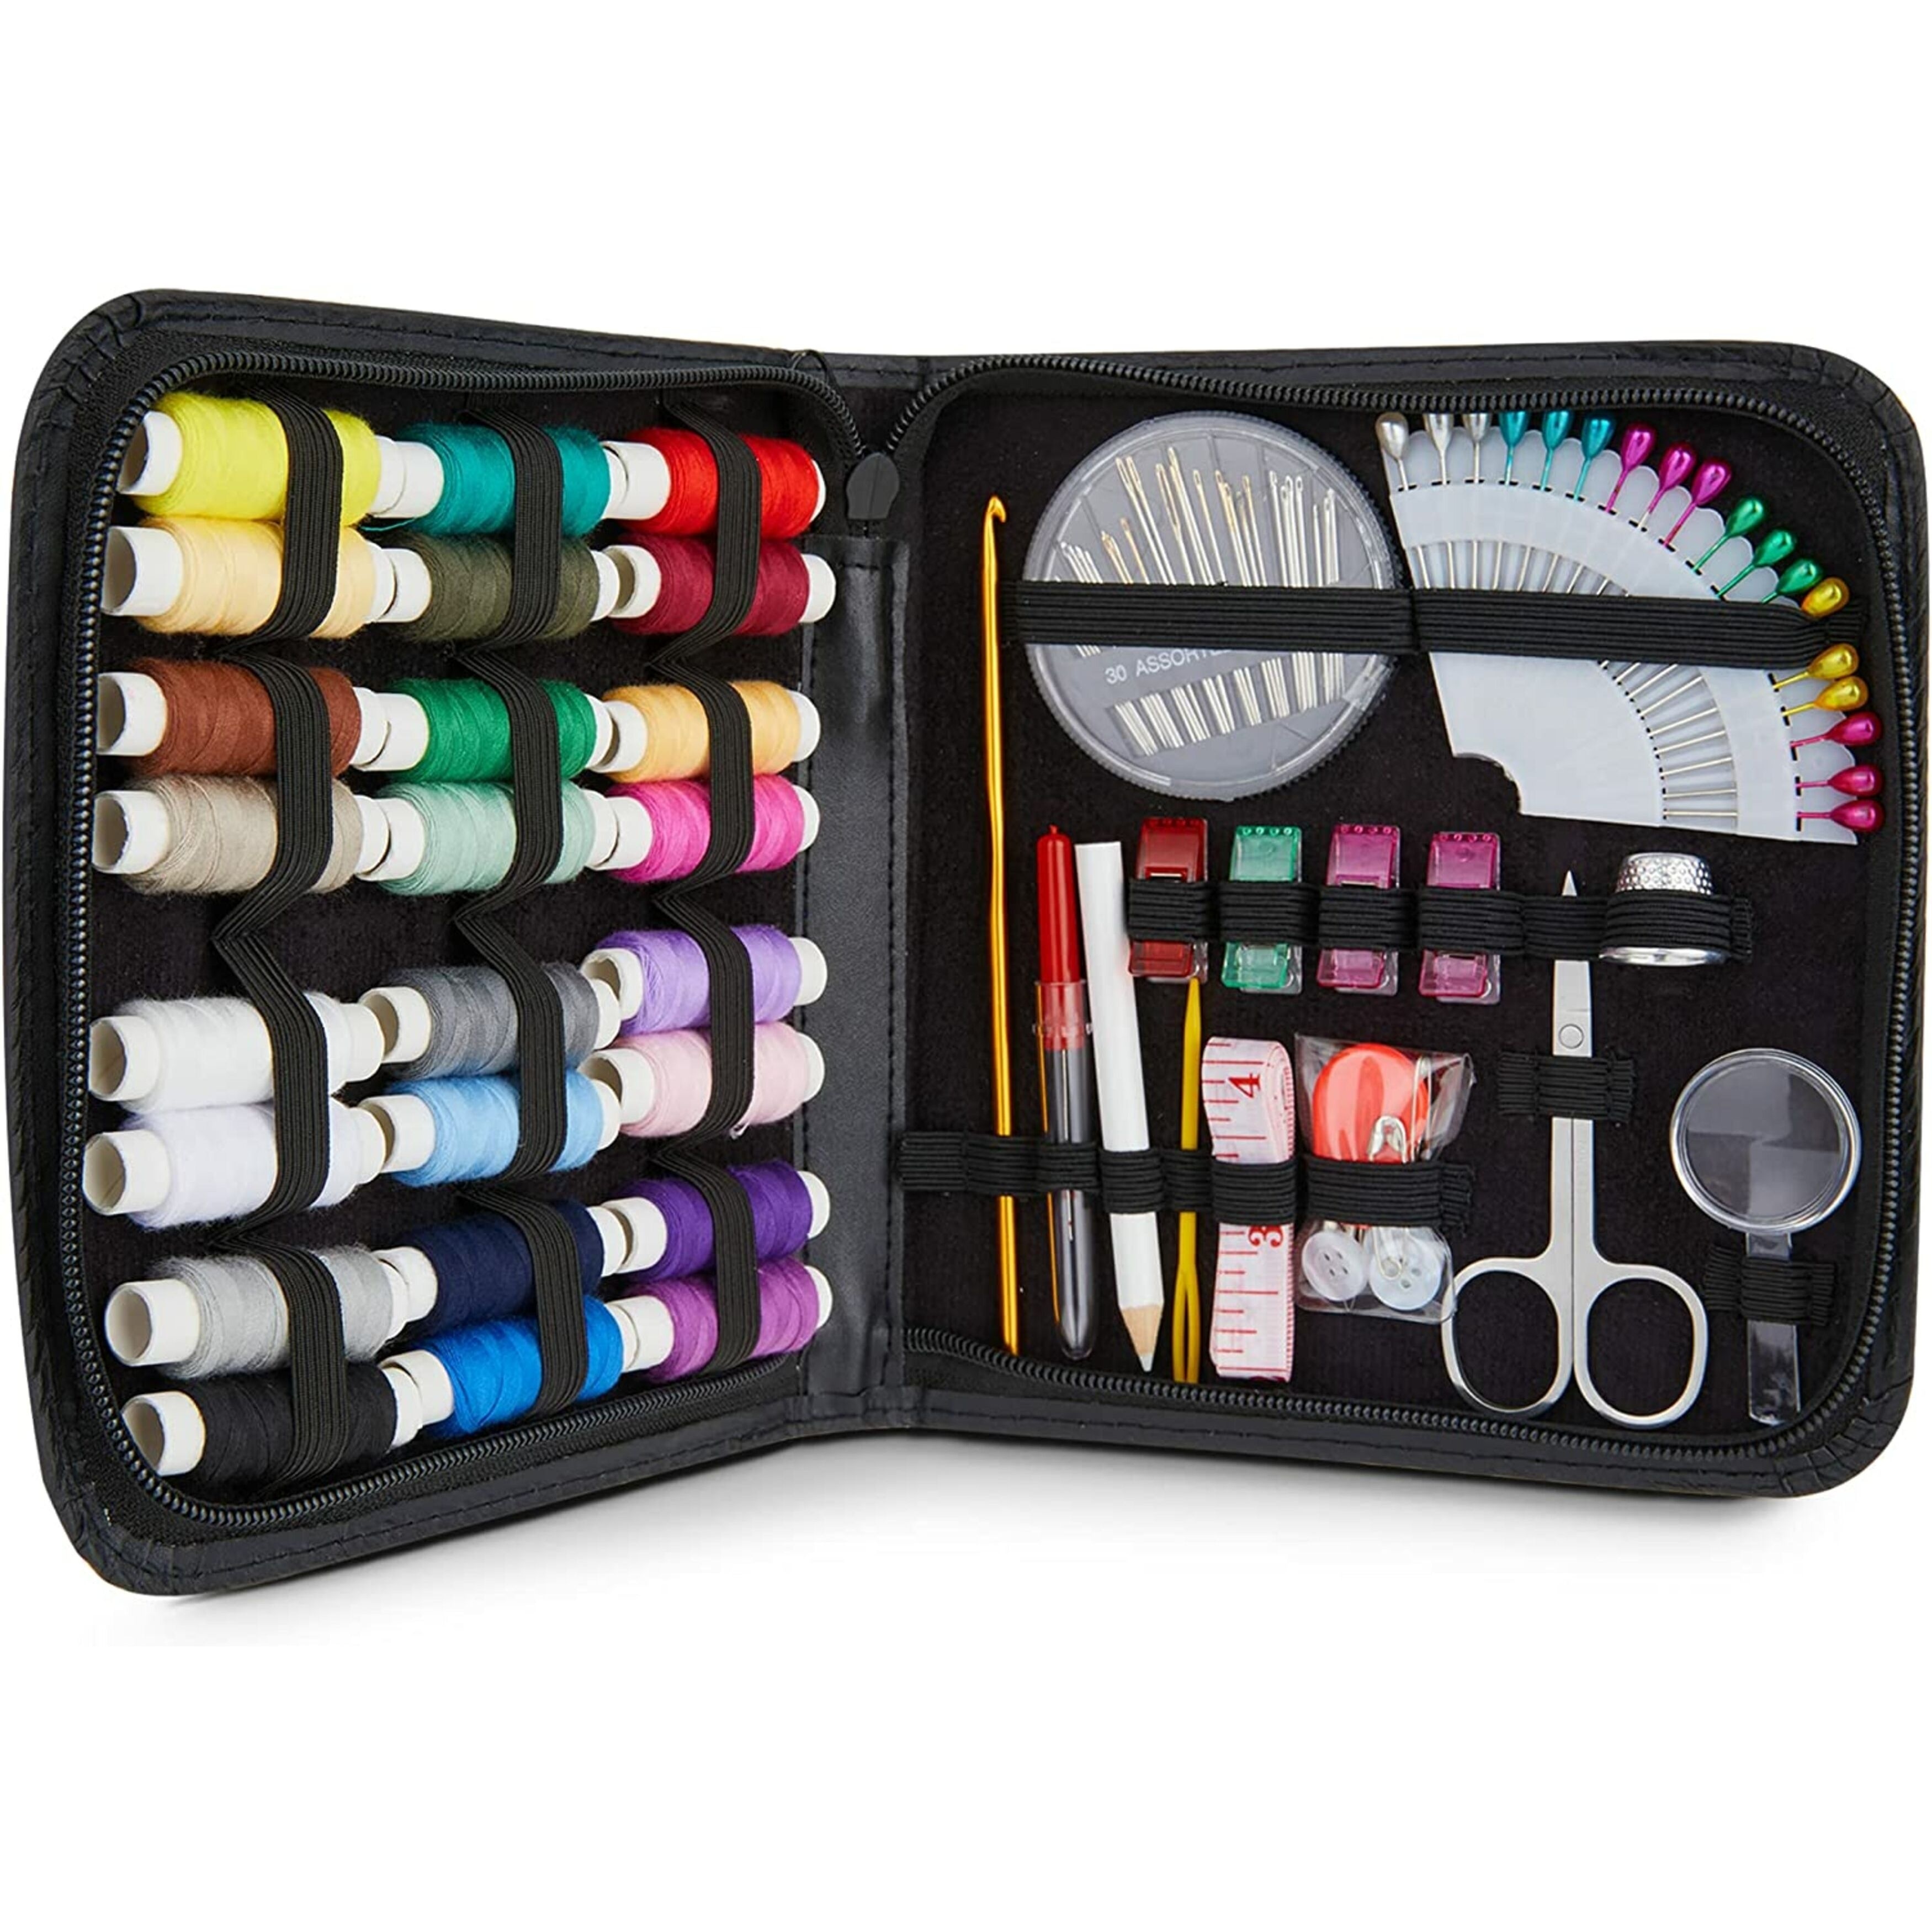 Multicolored Sewing Kit with Spools, Needles and Extra Sewing